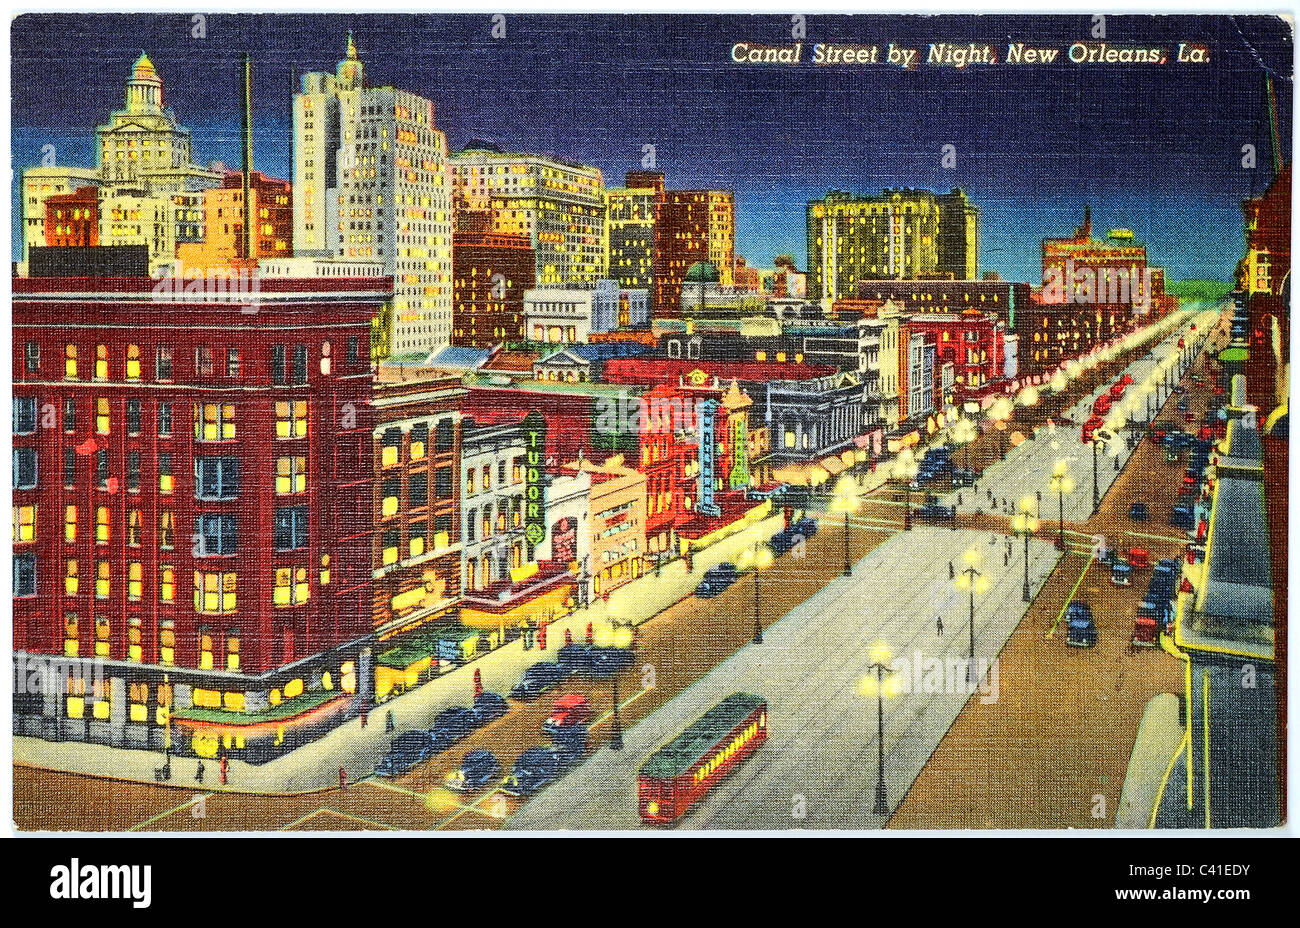 Canal Street at Night in New Orleans, Louisiana, from a vintage linen post card Stock Photo